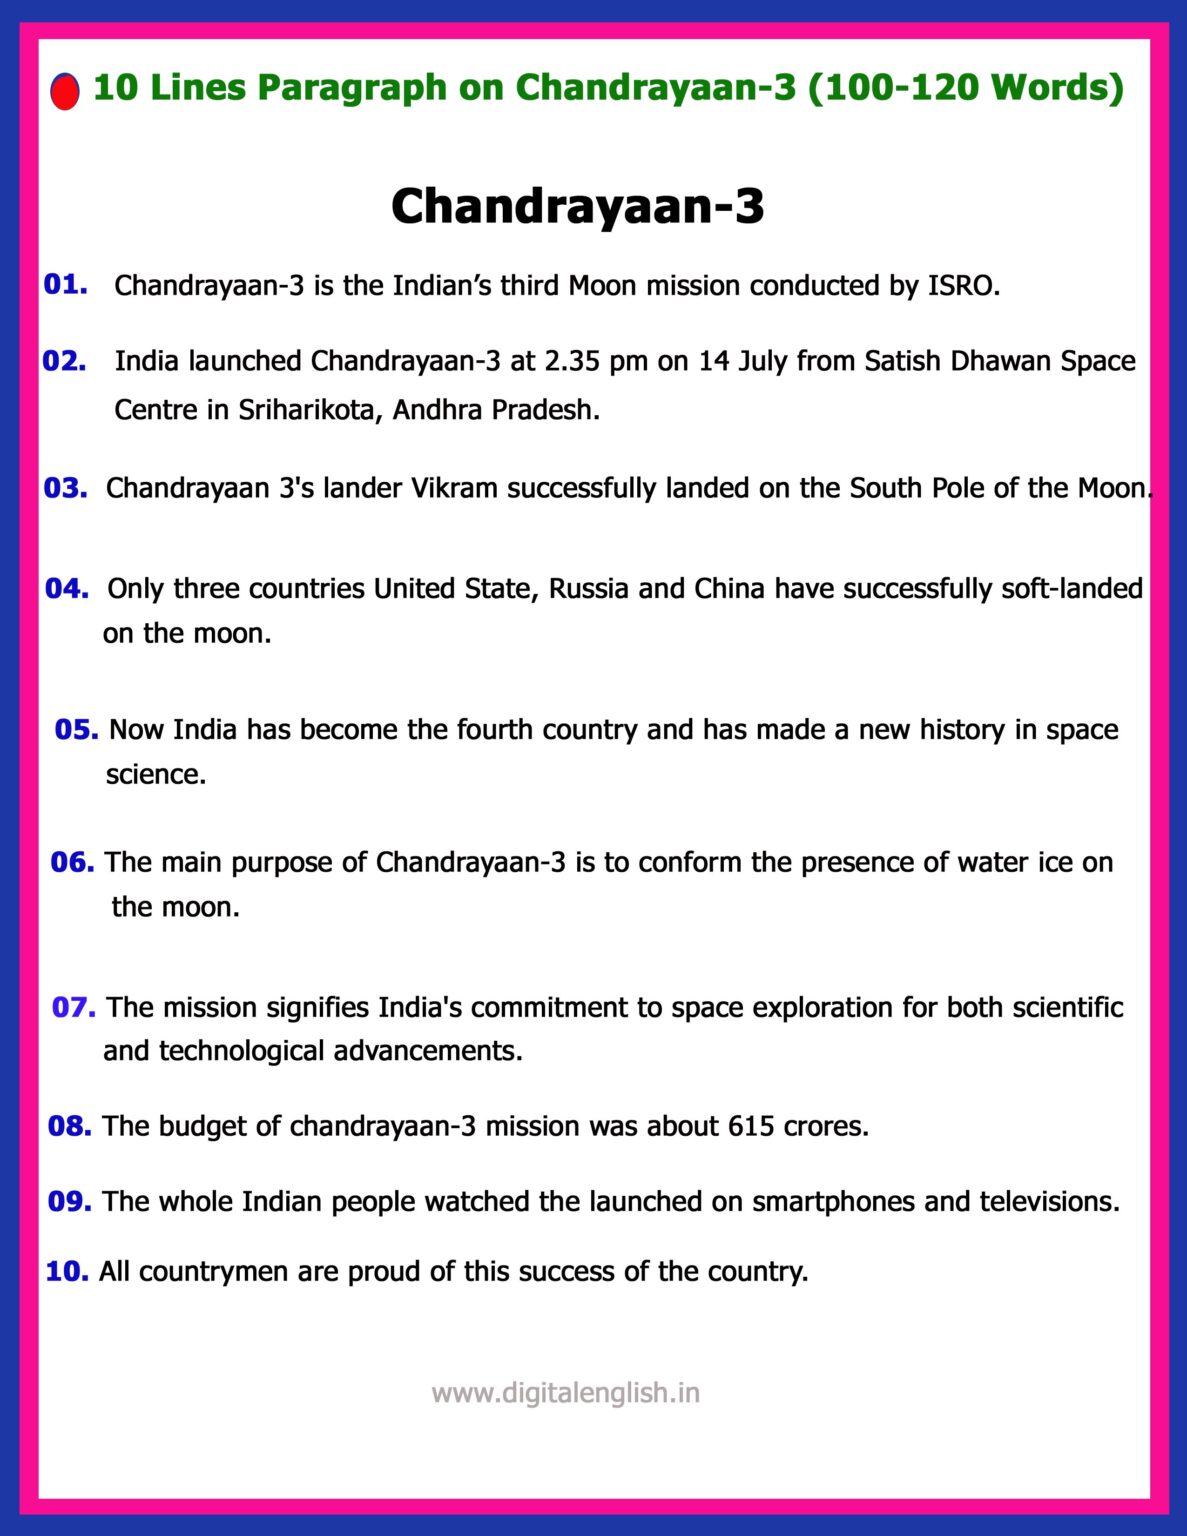 150 words essay about chandrayaan 3